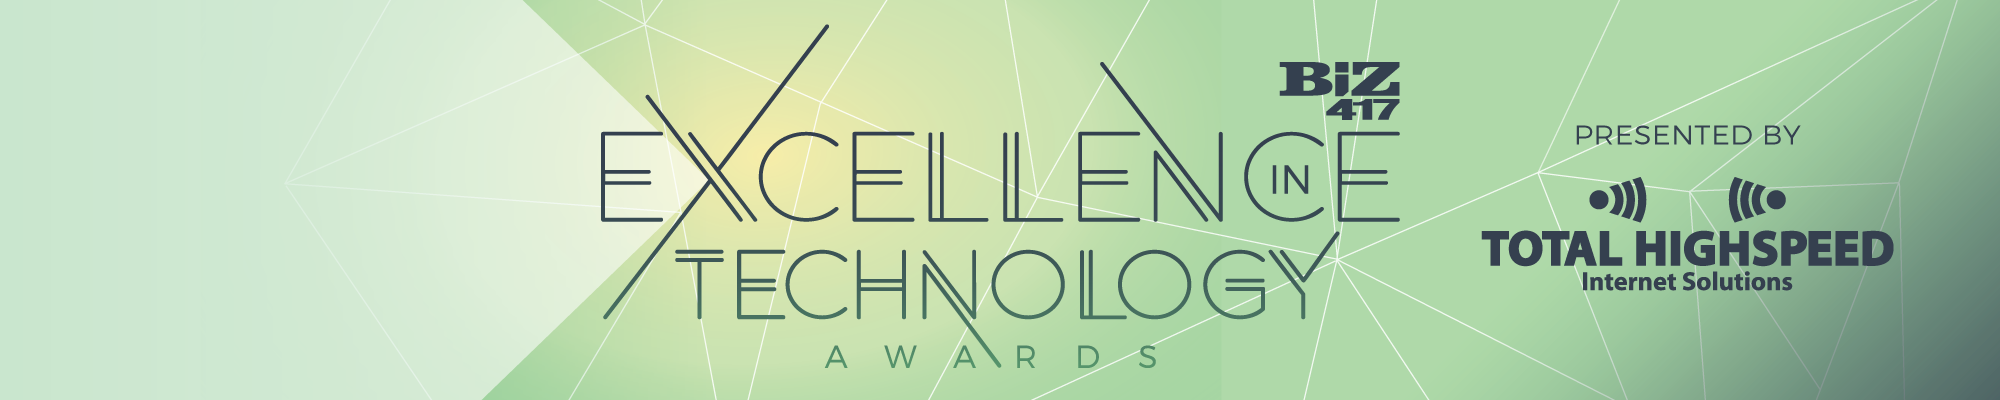 Biz 417's Excellence in Technology Awards Nominations